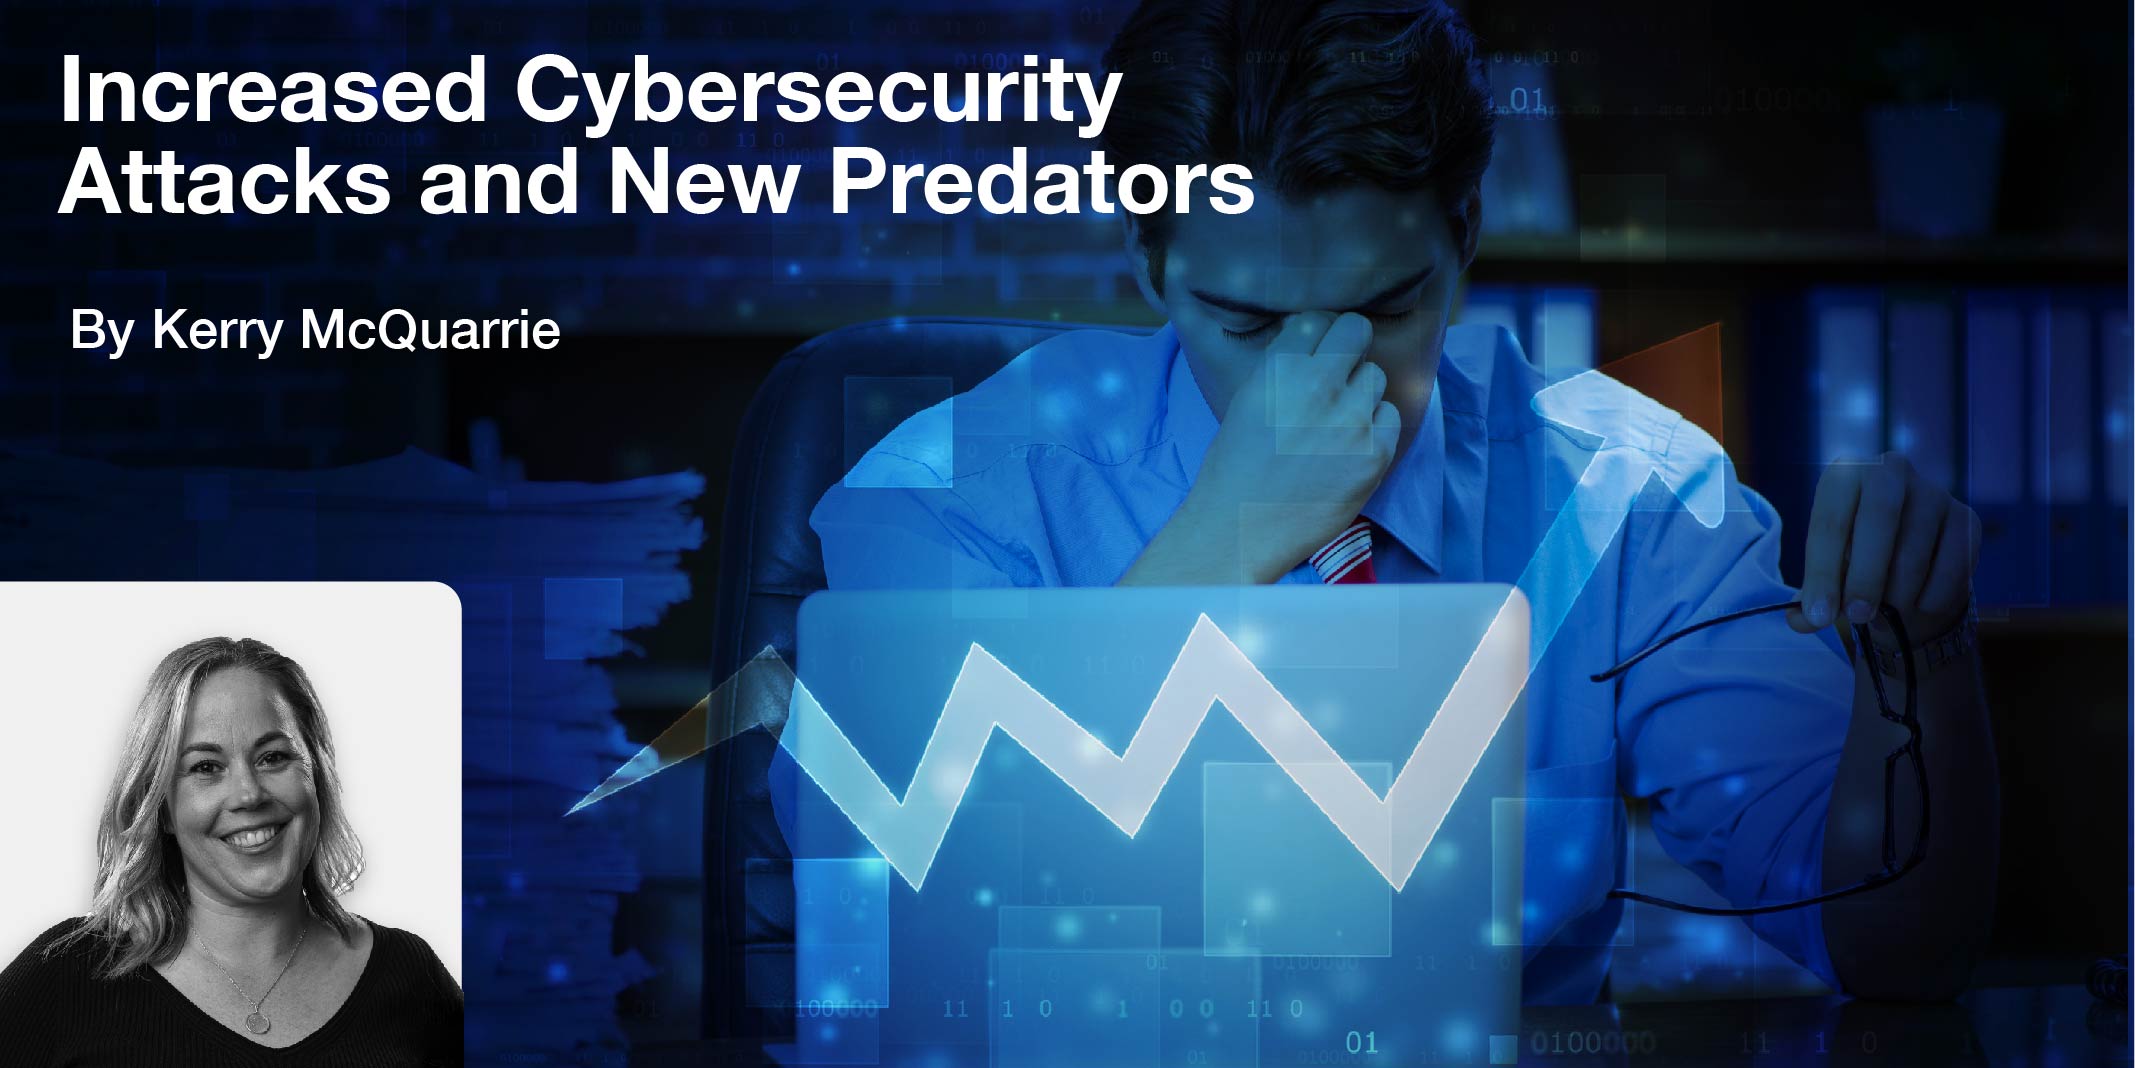 Increased Cybersecurity Attacks and New Predators